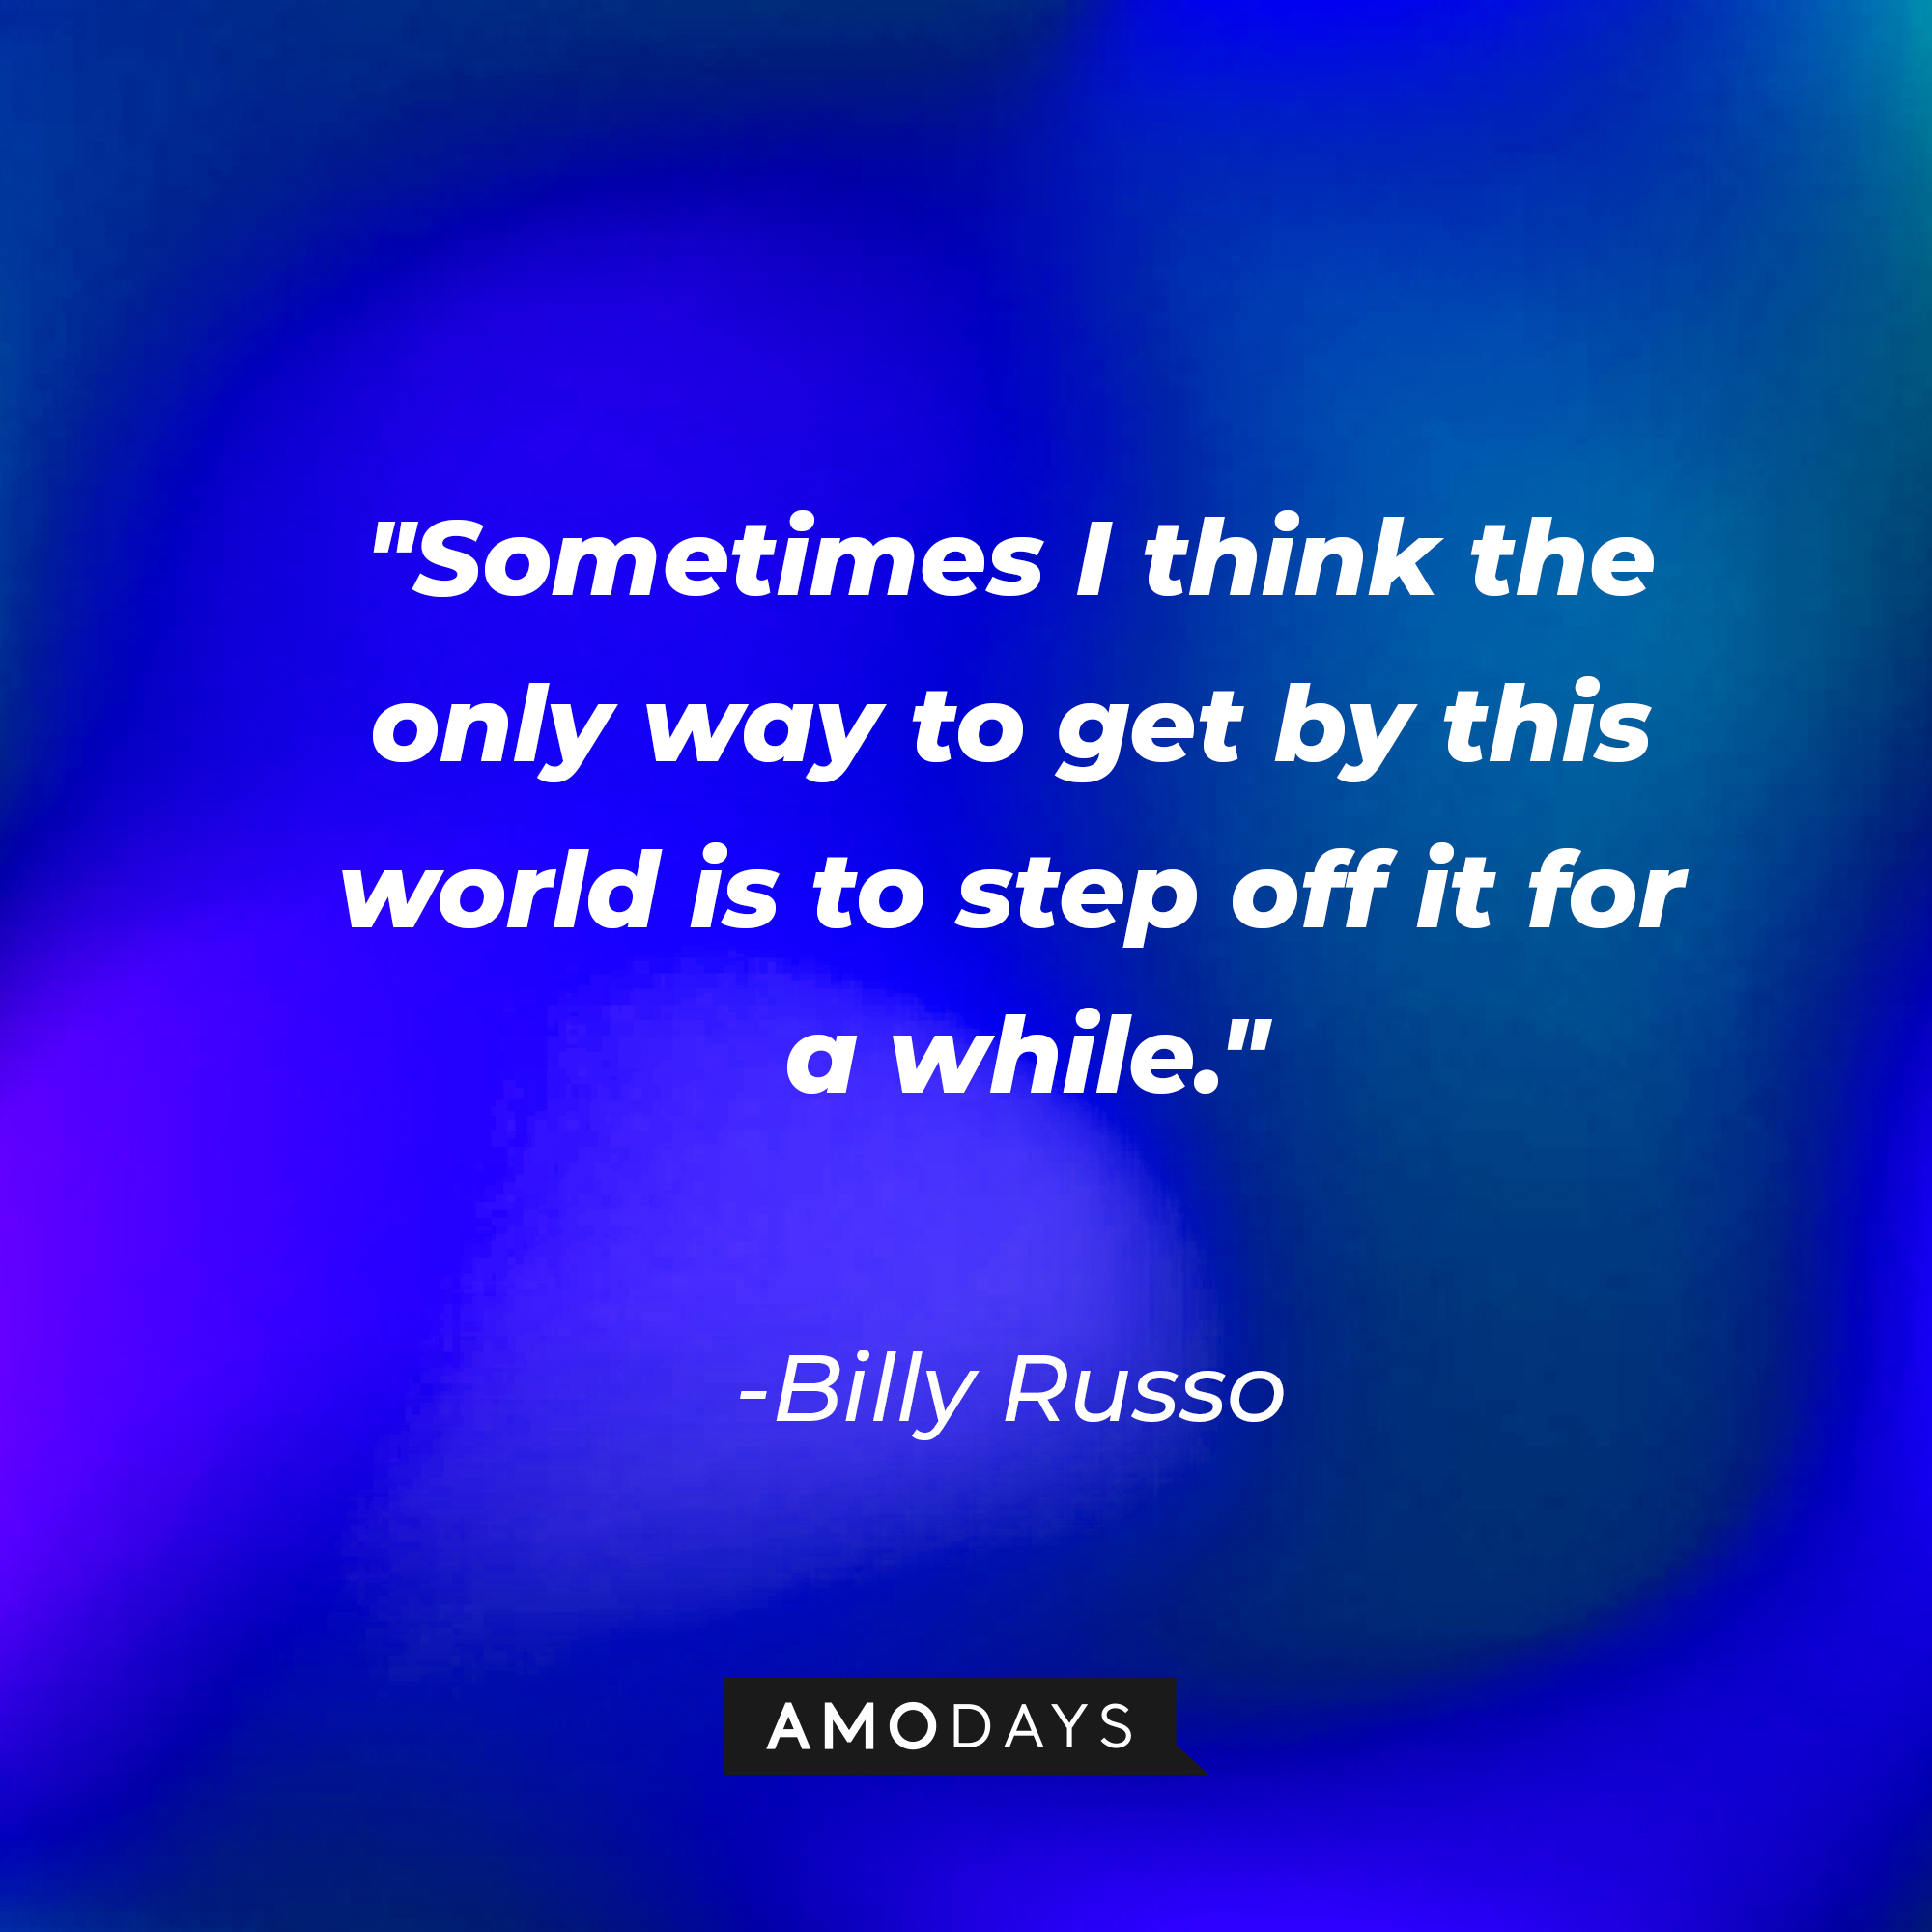 Billy Russo's quote: "Sometimes I think the only way to get by this world is to step off it for a while." | Source: AmoDays